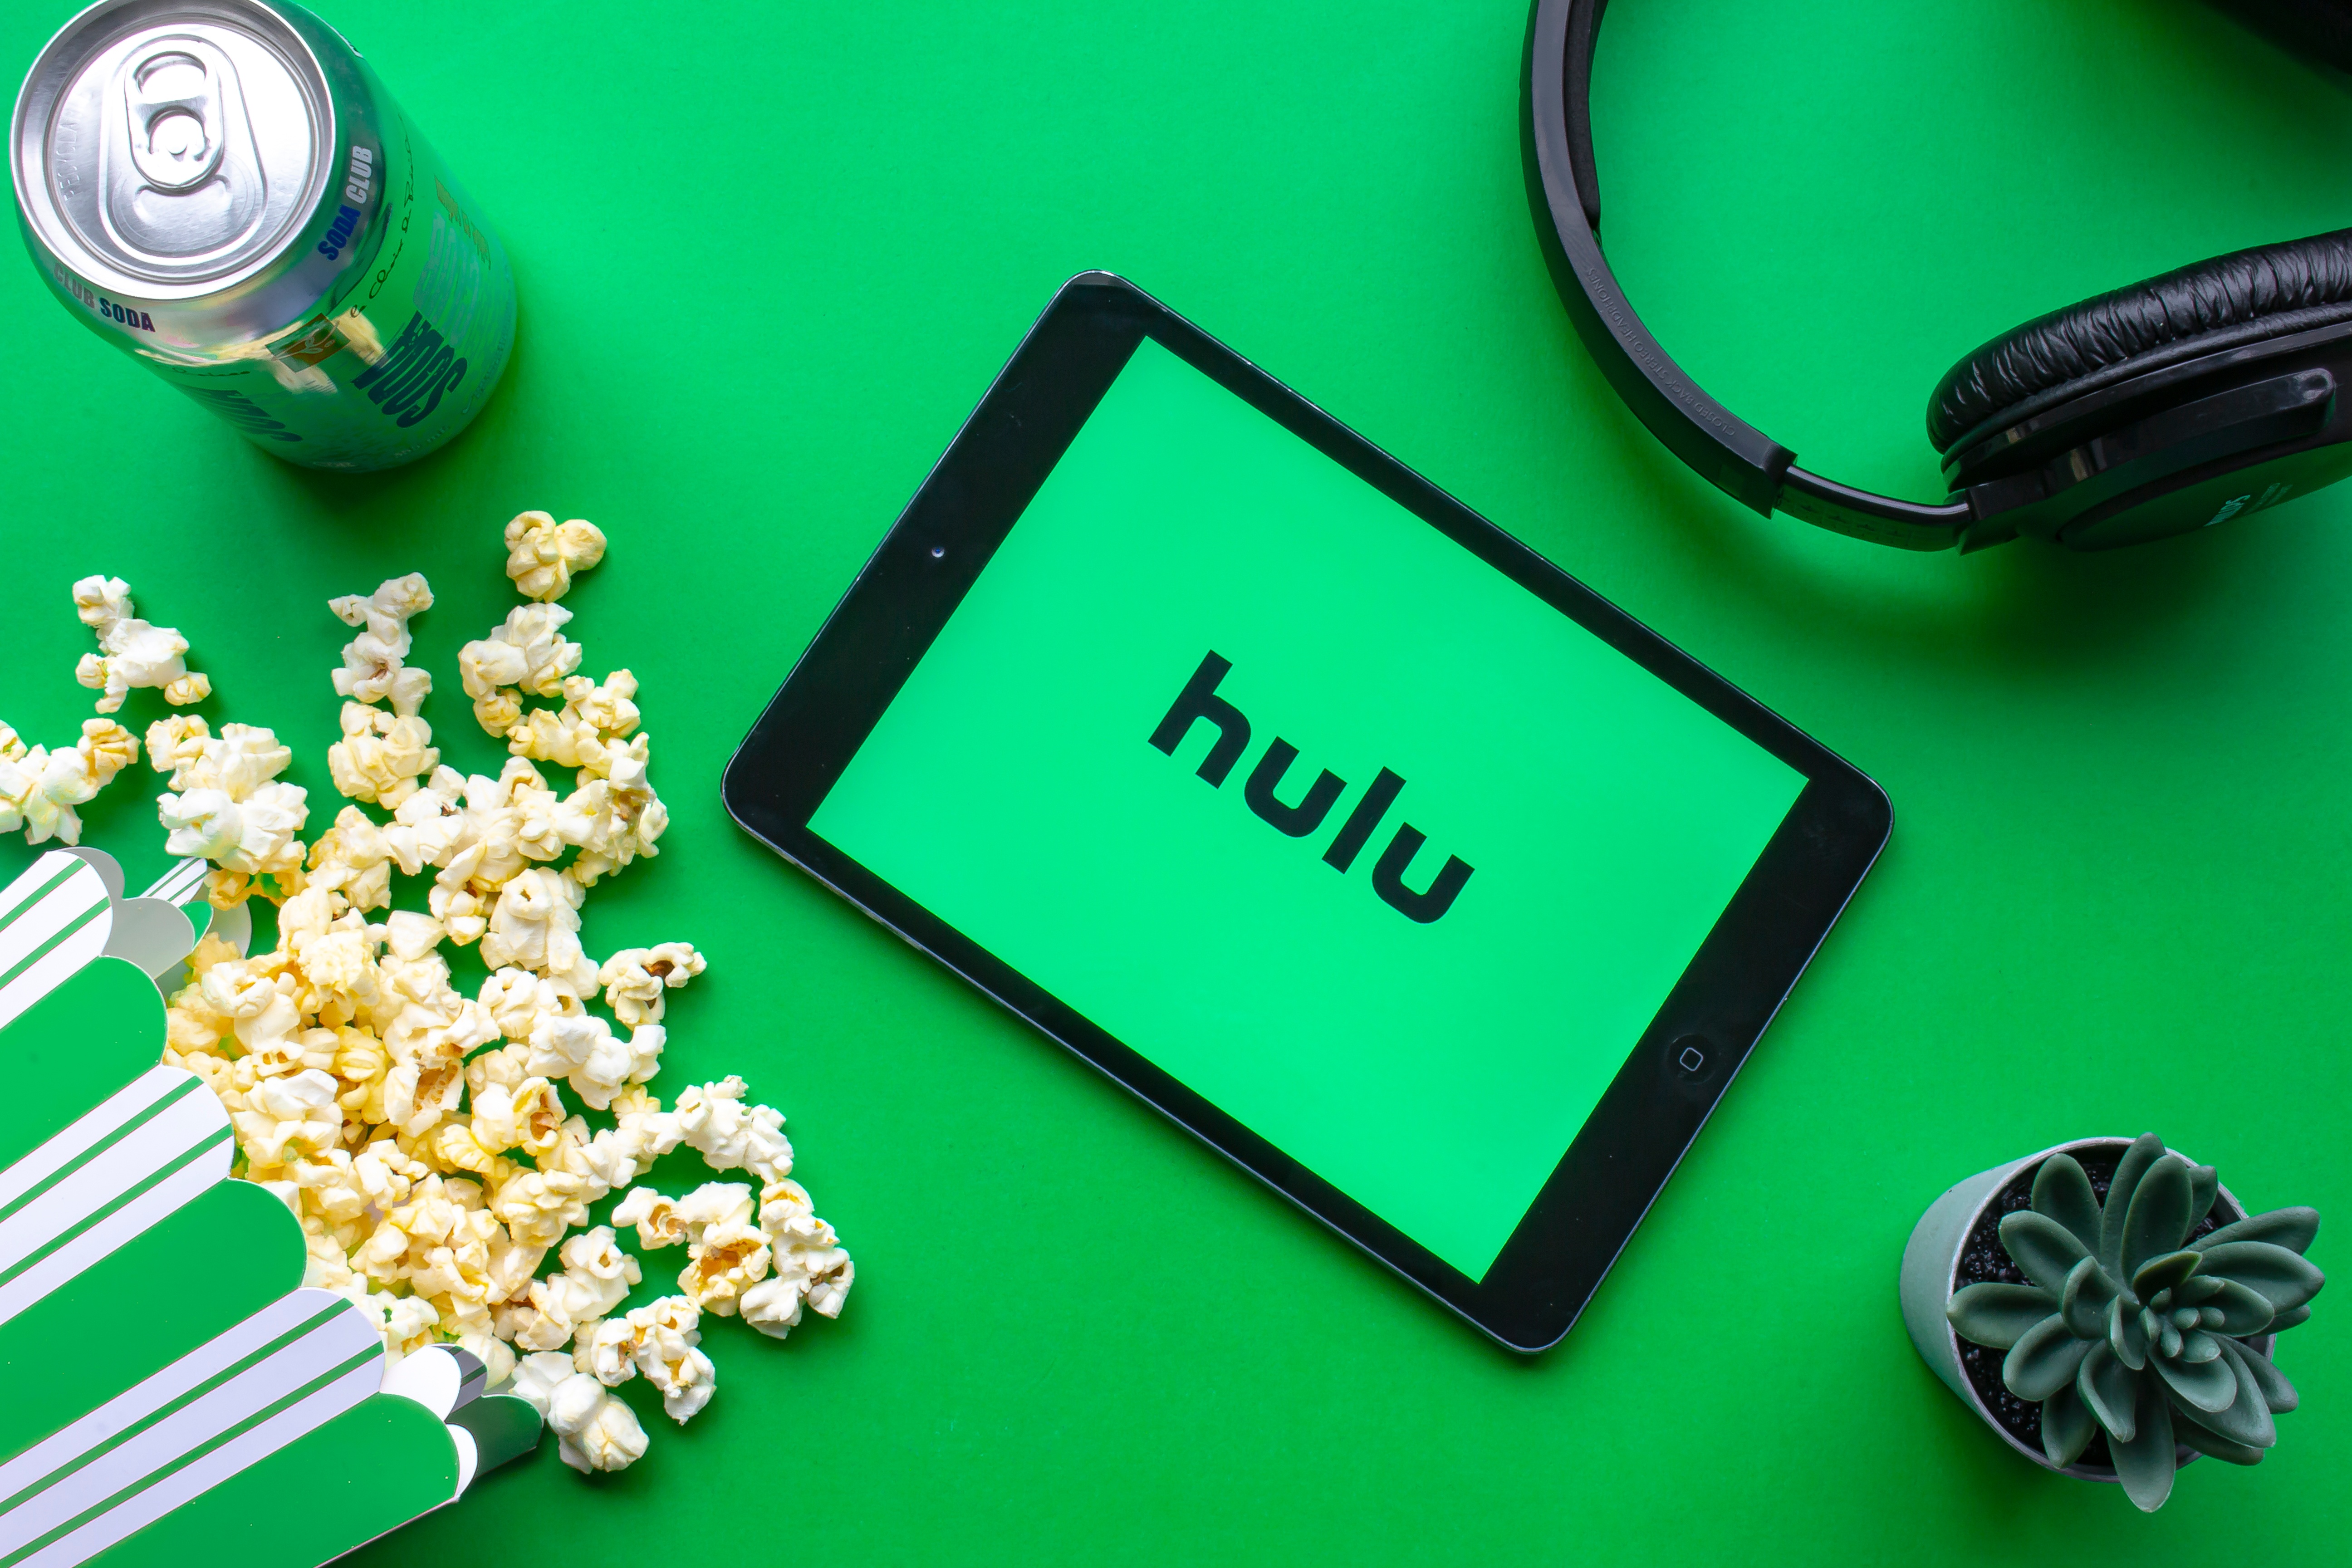 Meet Hulu’s Slightly Cheaper Live TV Plan With Some Limitations